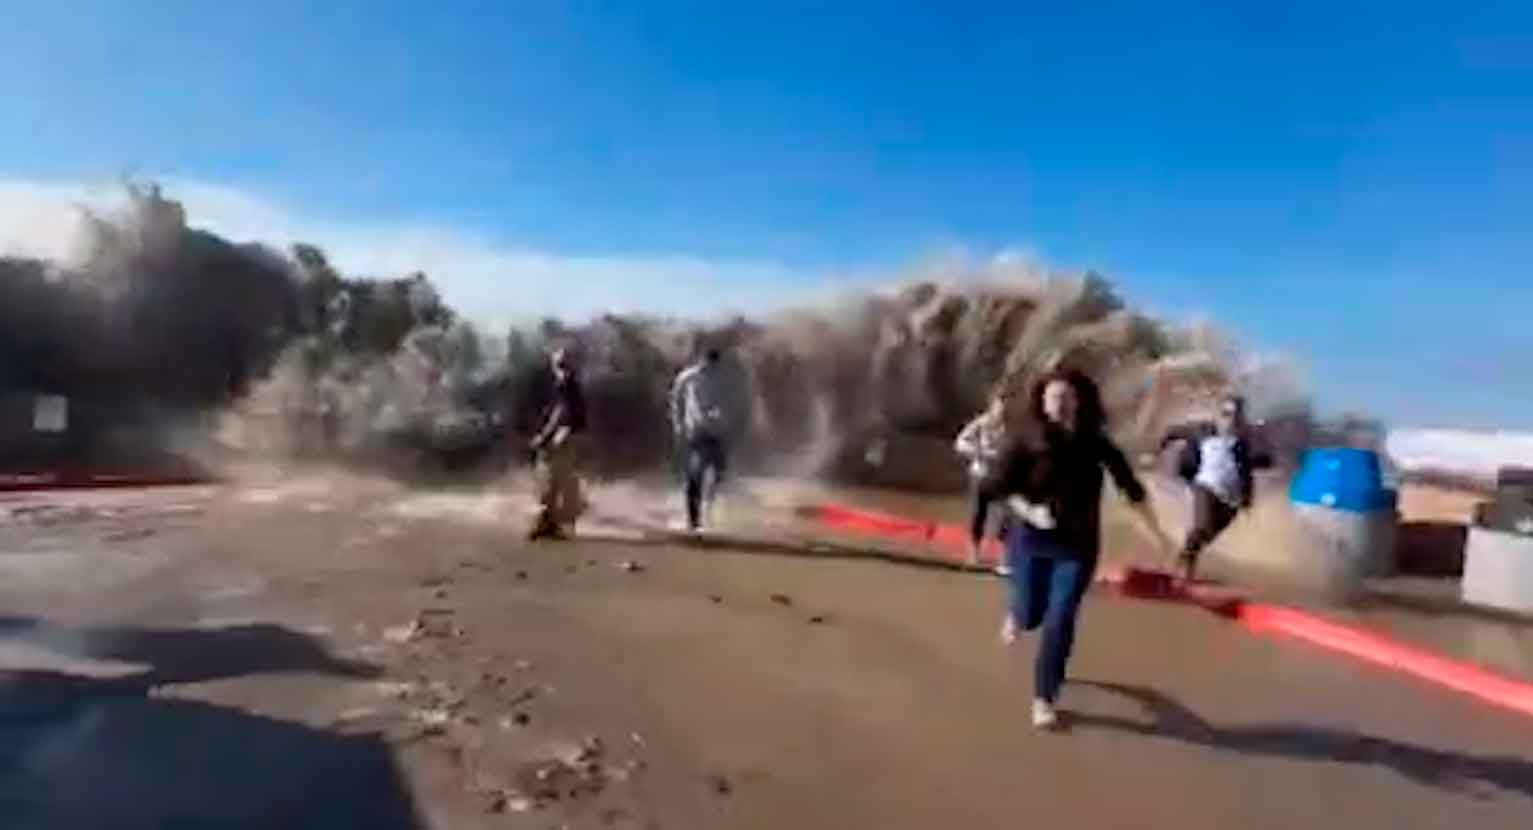 Video shows the moment a giant wave overwhelms a seawall and injures eight people. Photos and videos: Reproduction Twitter @Top_Disaster